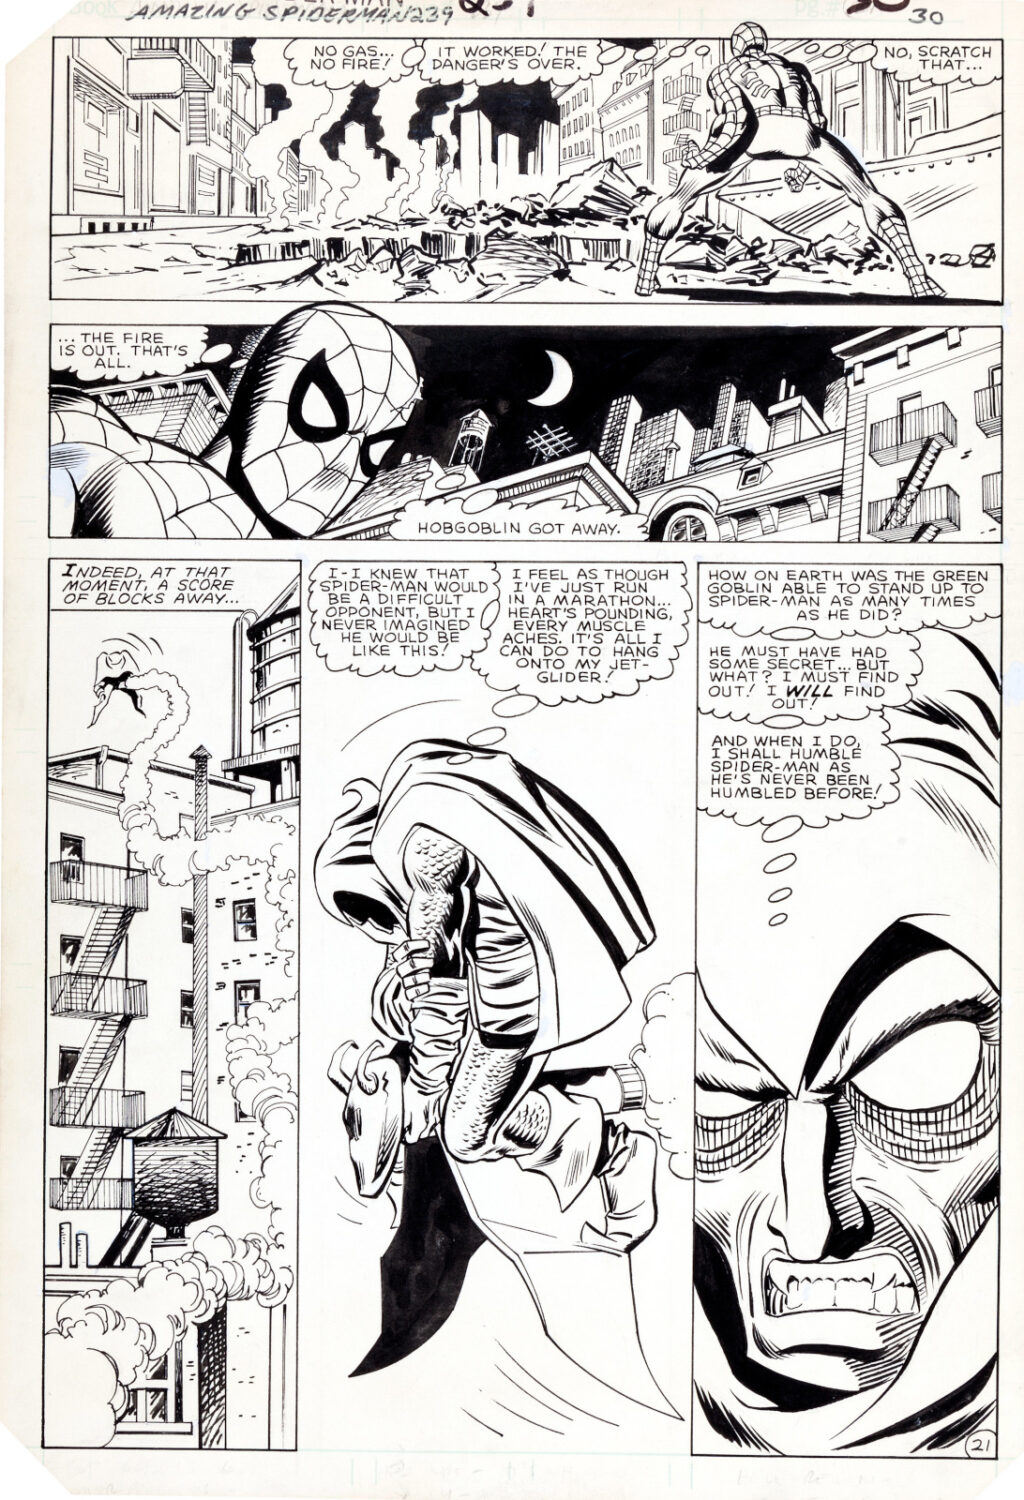 Amazing Spider Man issue 239 page 21 by John Romita Jr. and Frank Giacoia